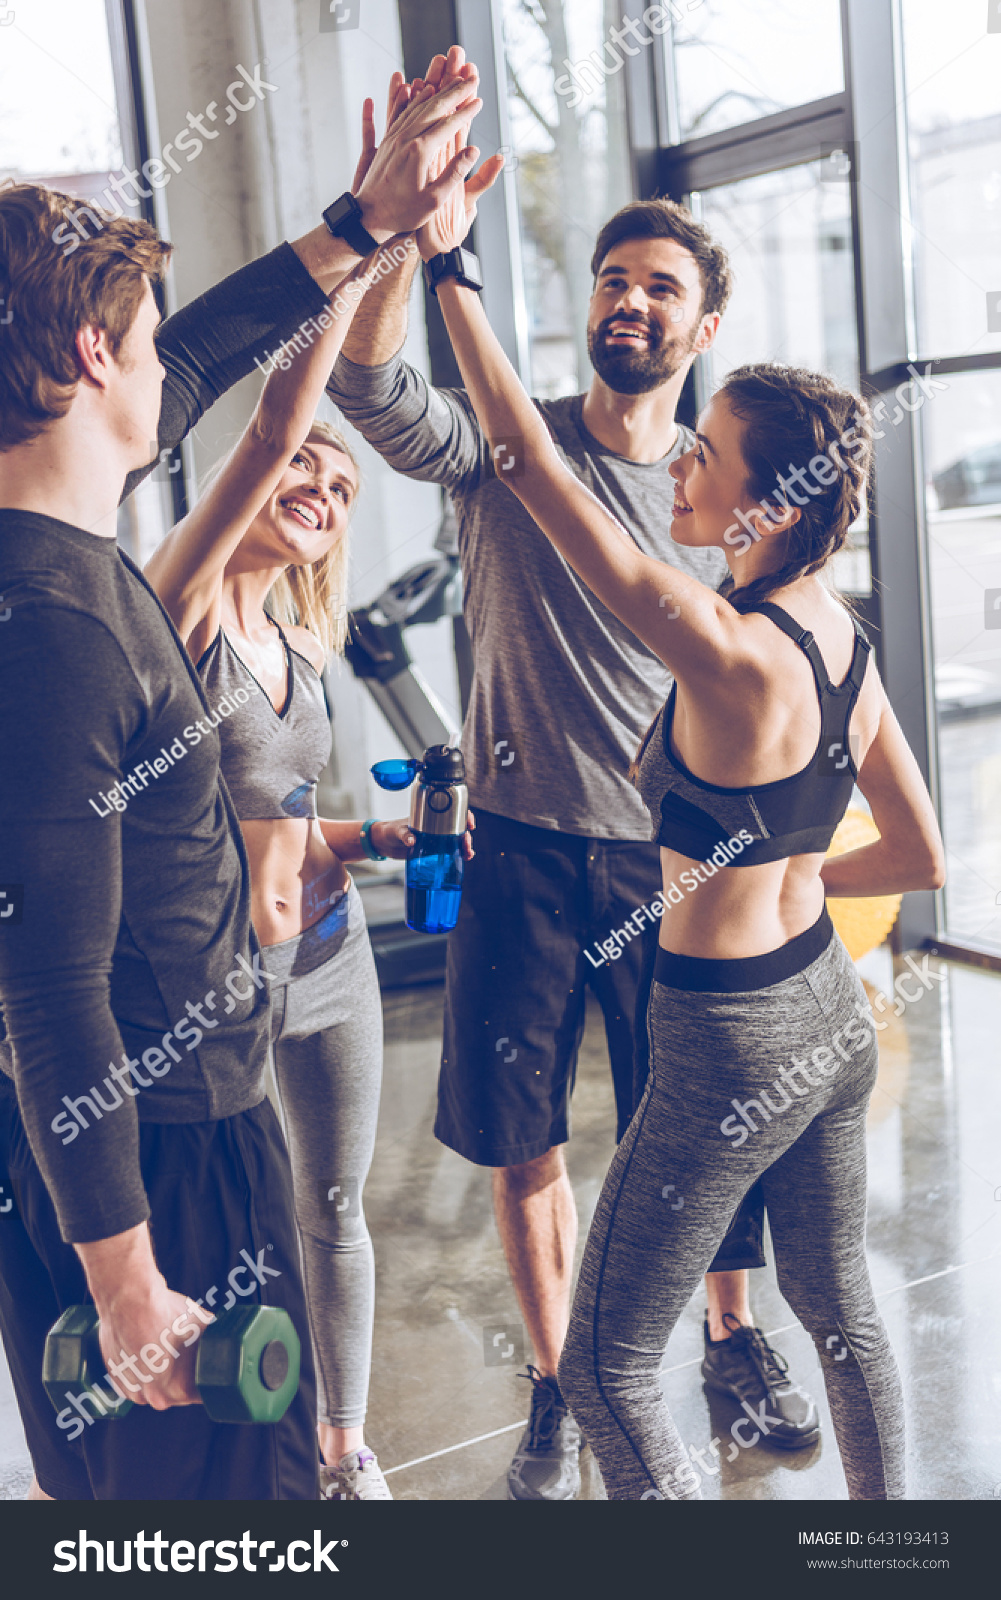 Happy young athletic people in sportswear giving high five in gym #643193413